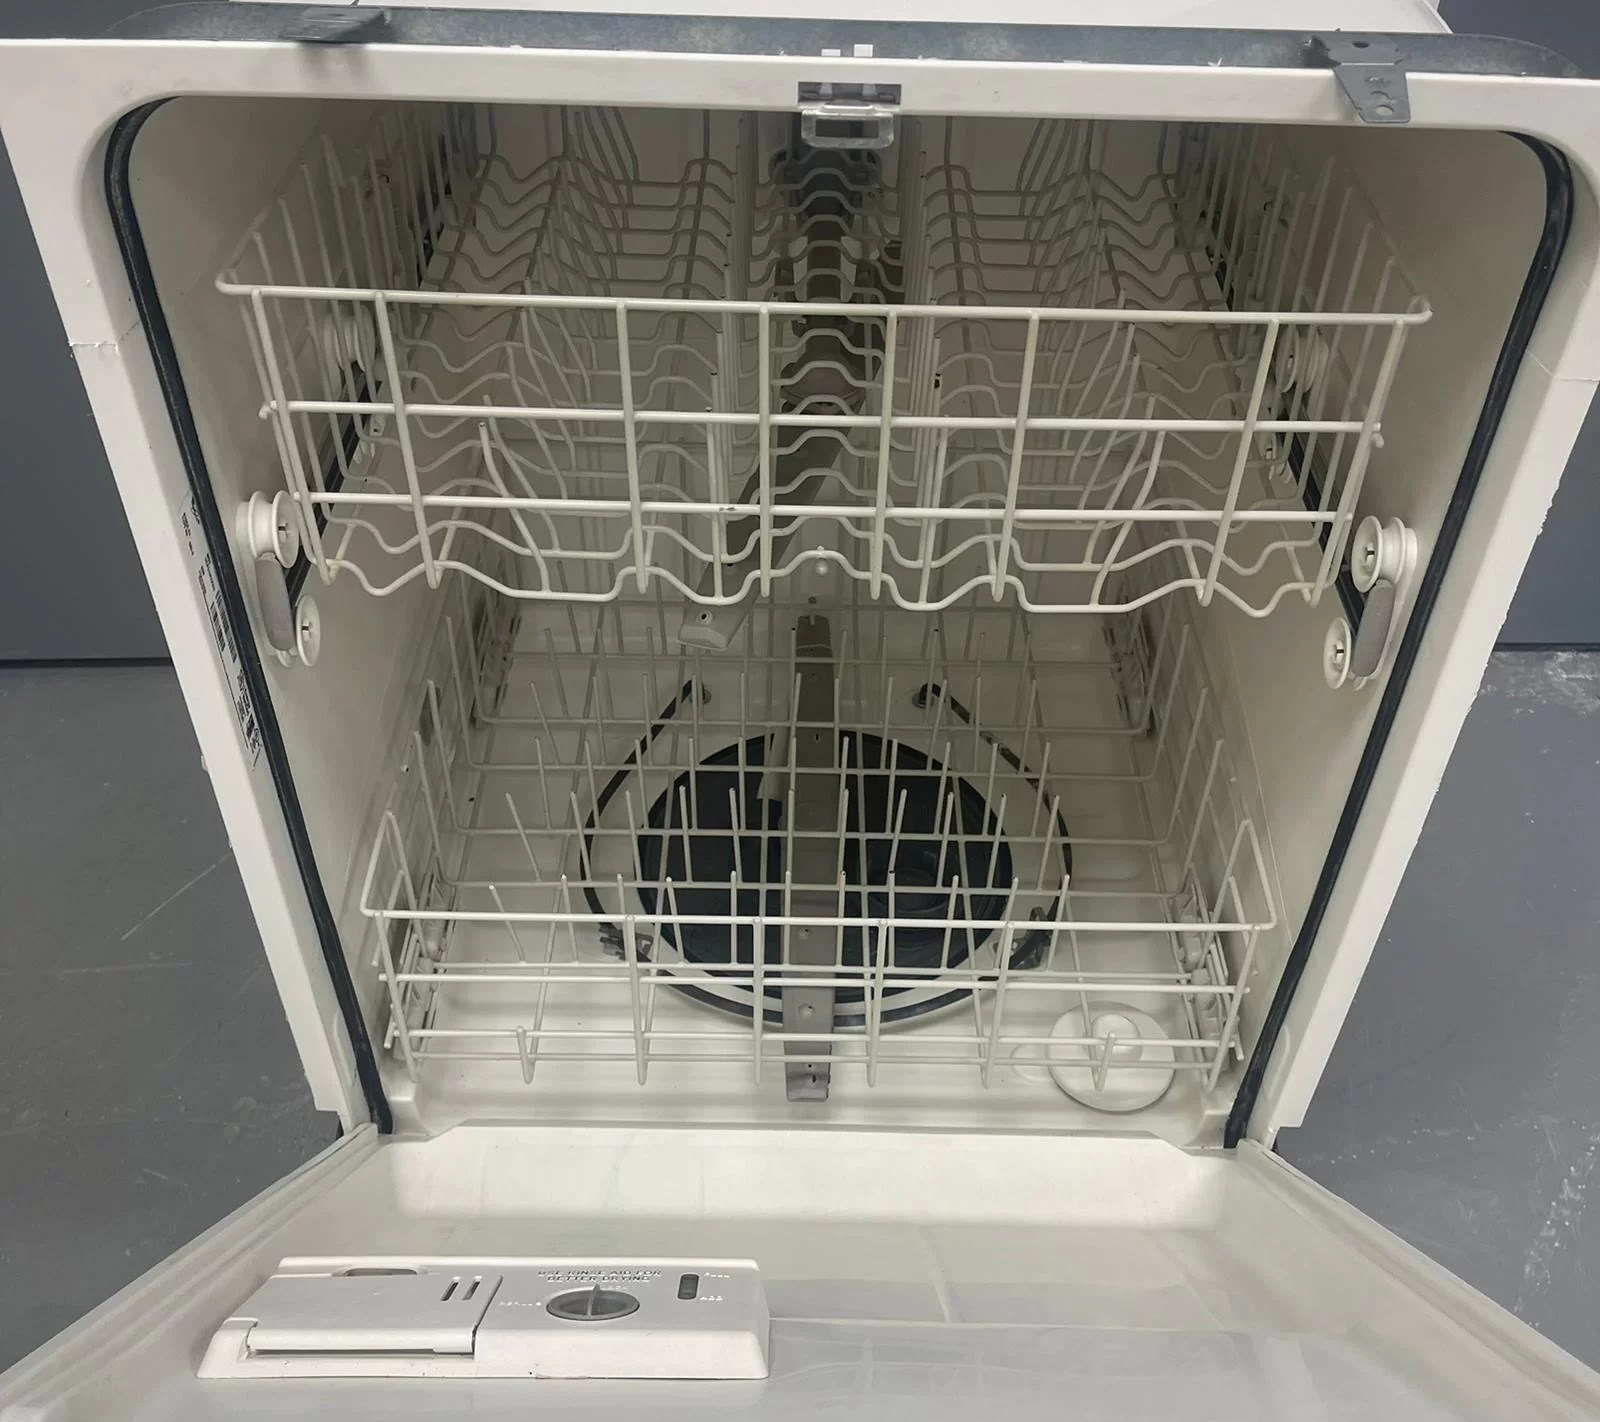 How To Fix The Error Code 45141 For Whirlpool Dishwasher